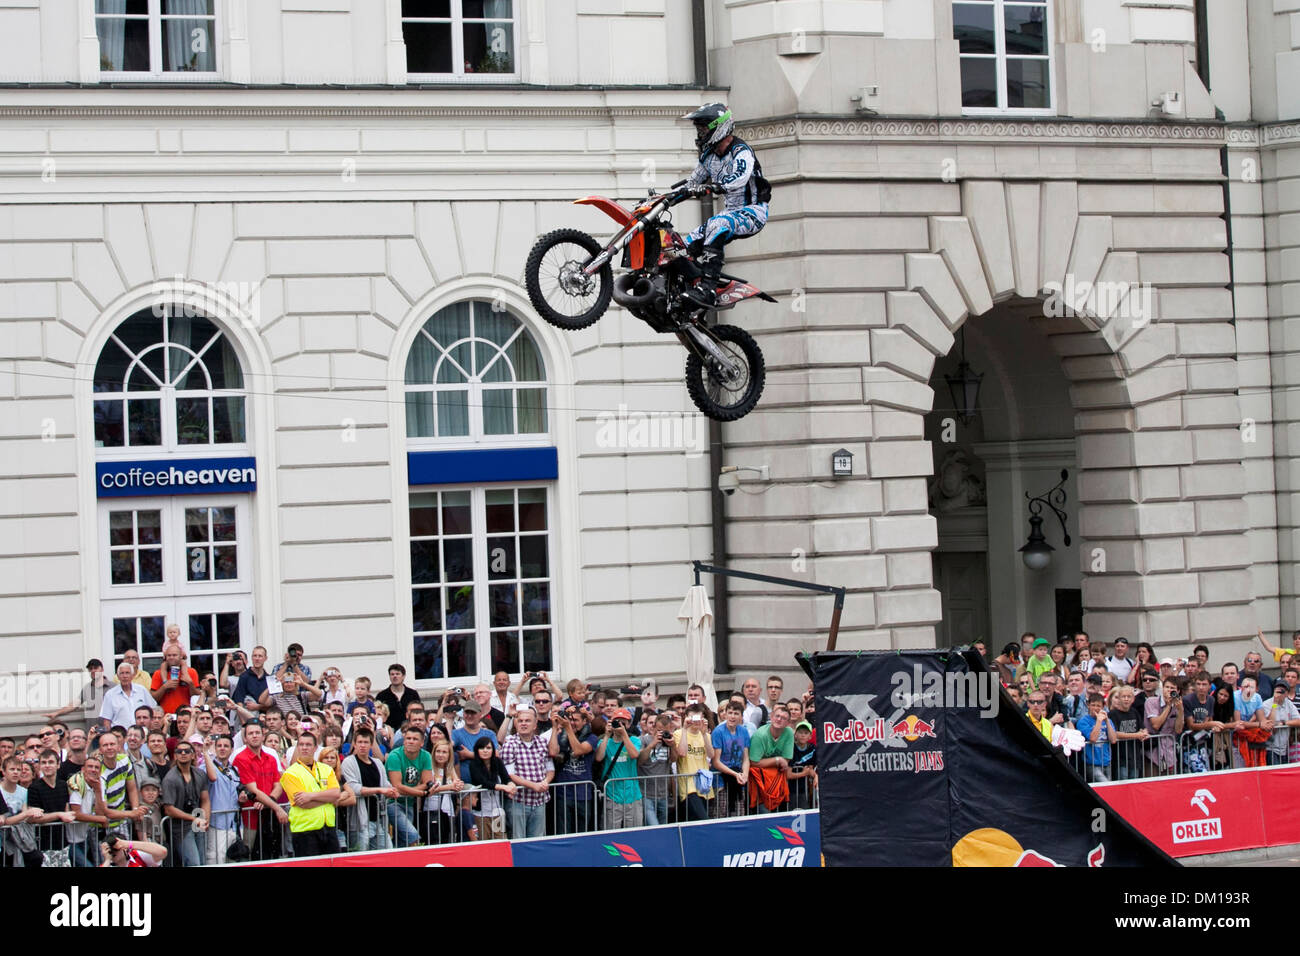 WARSAW, POLAND - June 18, 2011: Performance Red Bull X-Fighters Jams at Verva Street Racing on June 18, 2011 in Warsaw, Poland. Stock Photo